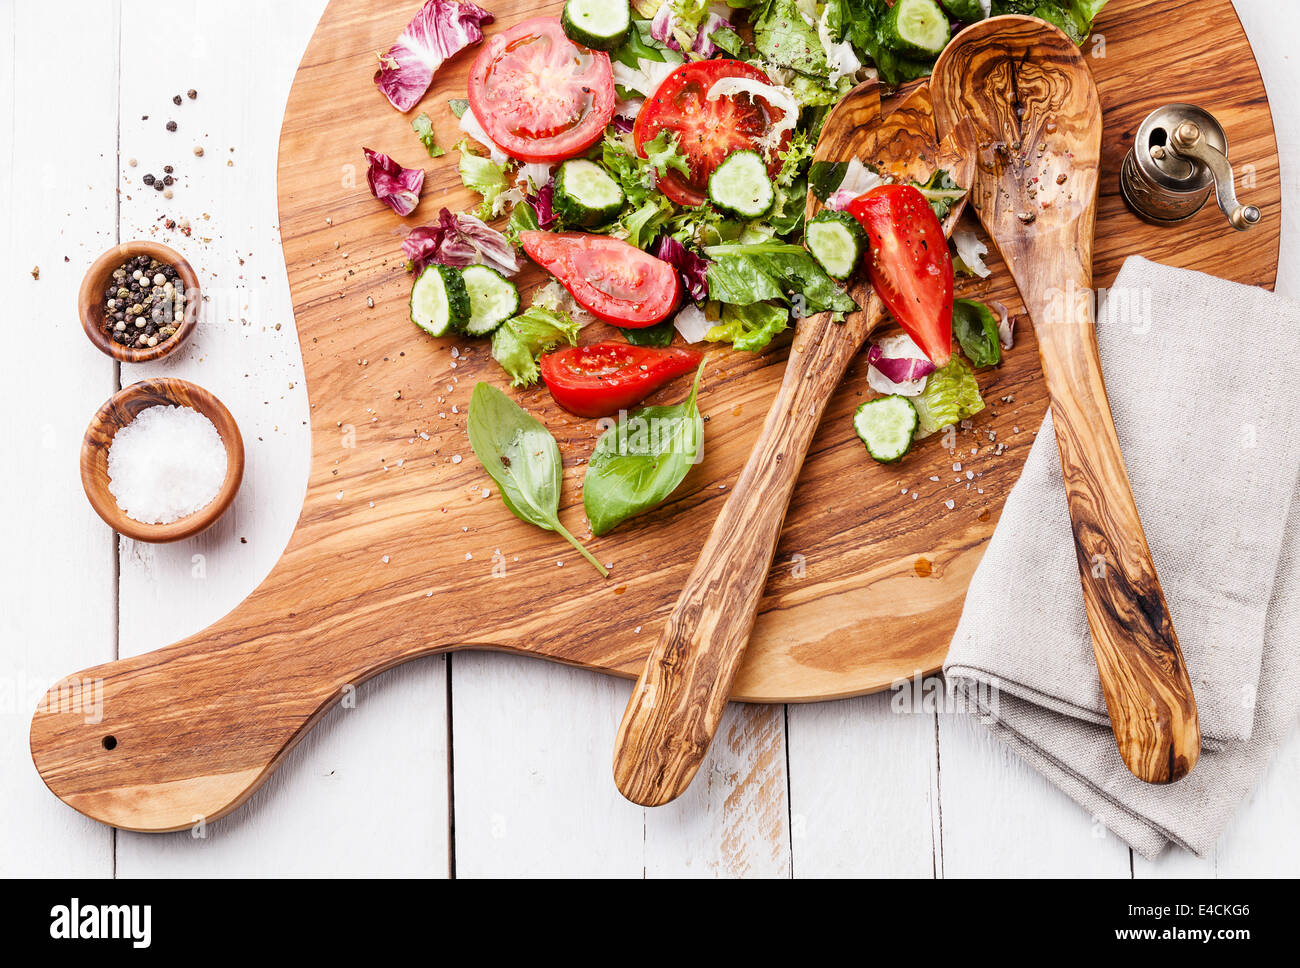 Ingredients of Fresh vegetable salad on olive wood cutting board Stock Photo